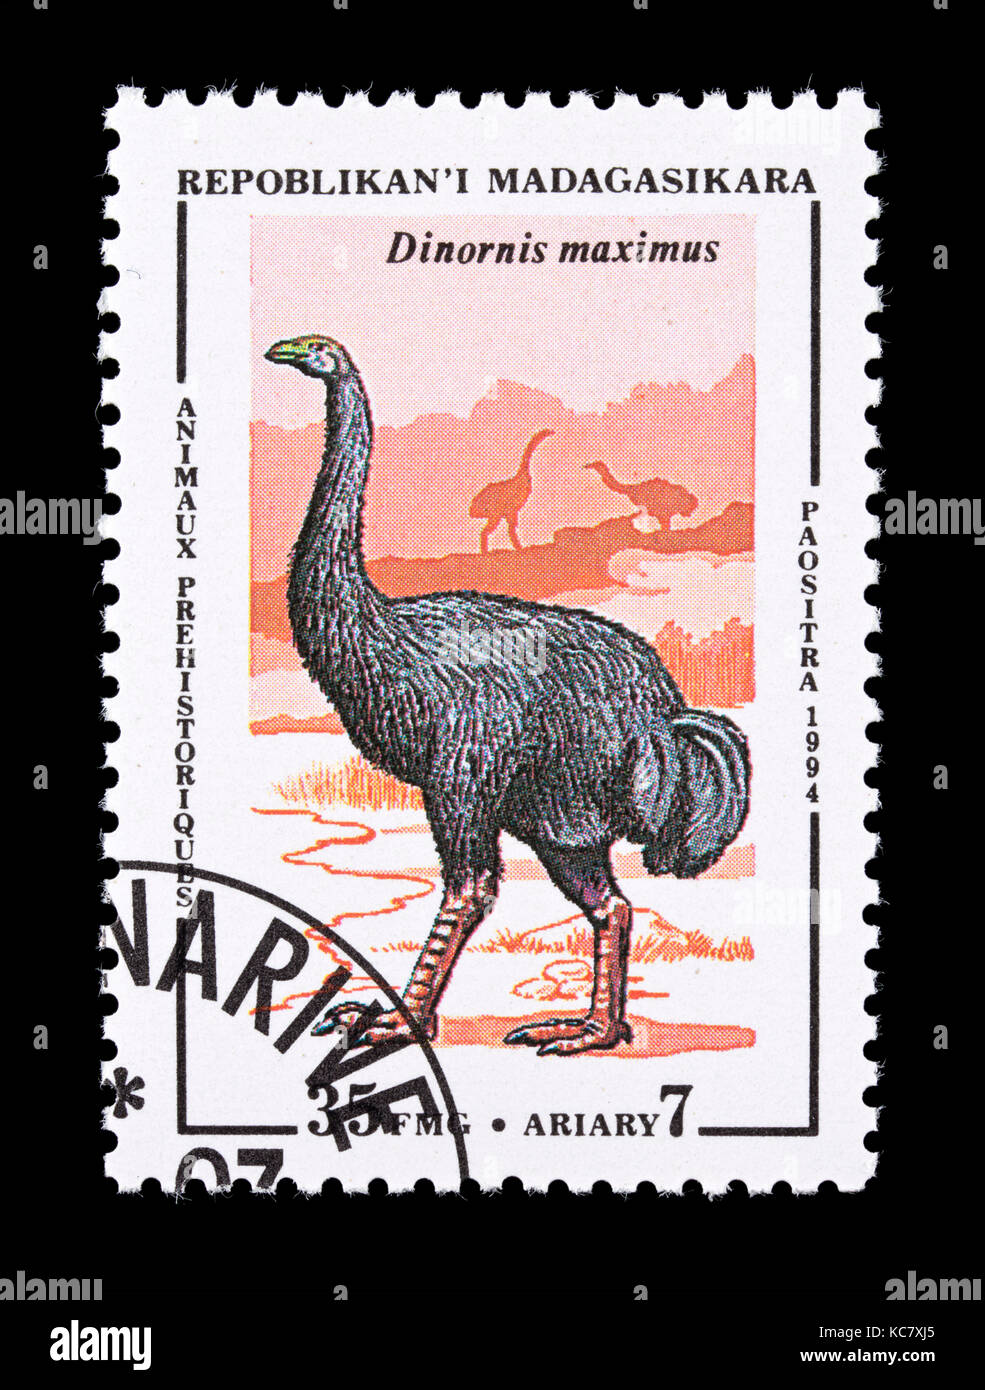 Postage stamp from Madagascar depicting a (Dinornis maximus) Stock Photo